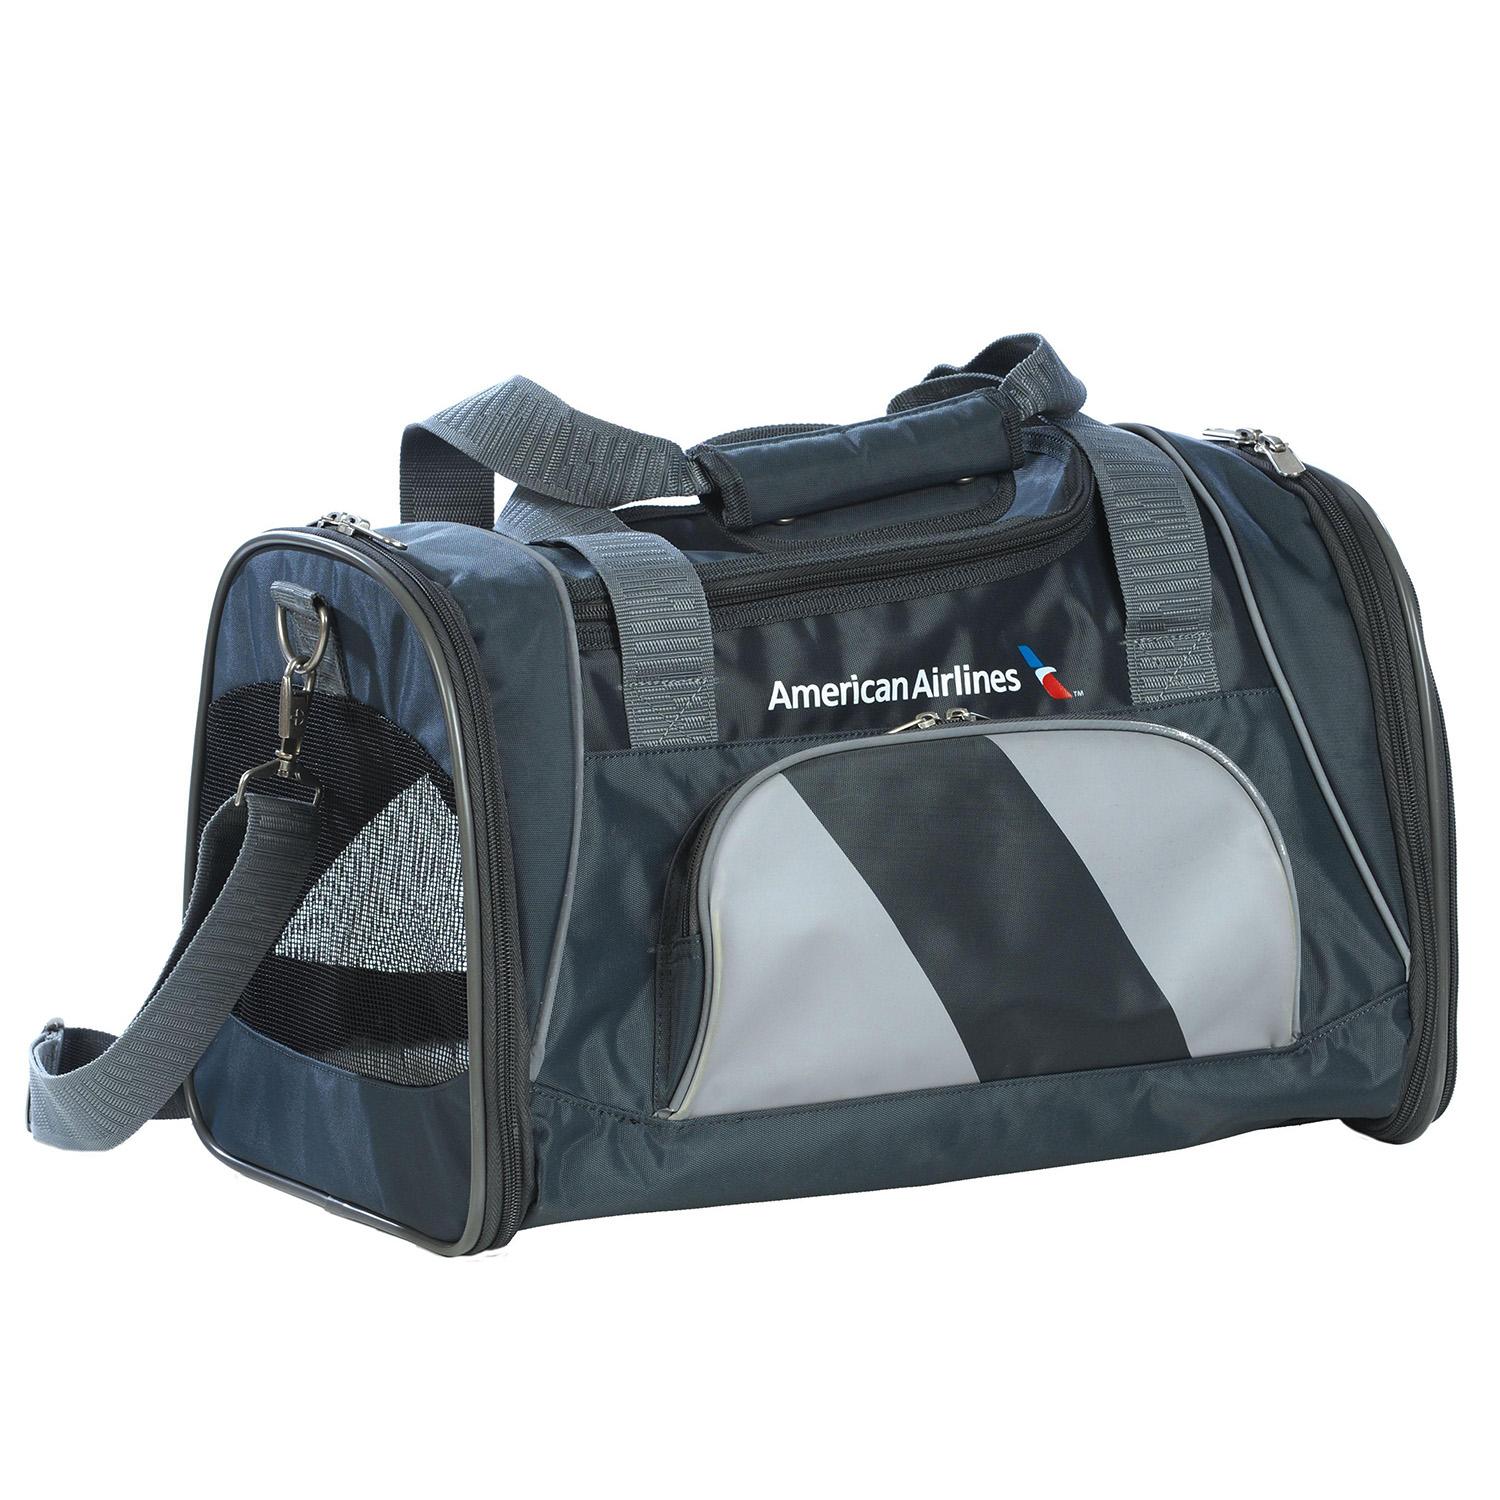 Sherpa Travel American Airlines Duffel Dog Carrier - Charcoal